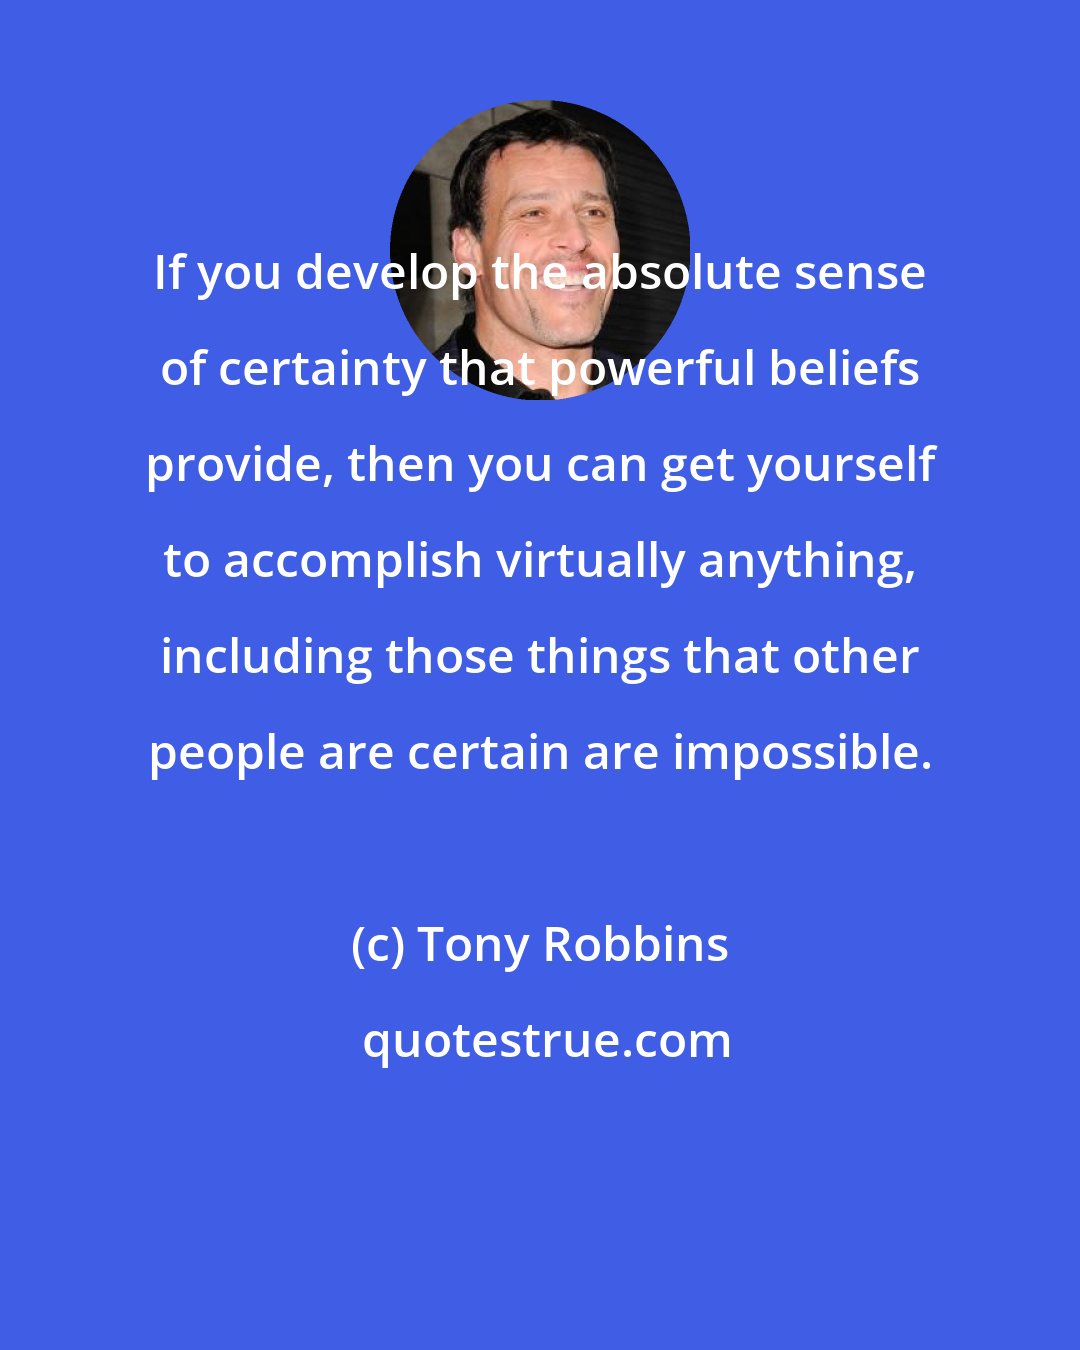 Tony Robbins: If you develop the absolute sense of certainty that powerful beliefs provide, then you can get yourself to accomplish virtually anything, including those things that other people are certain are impossible.